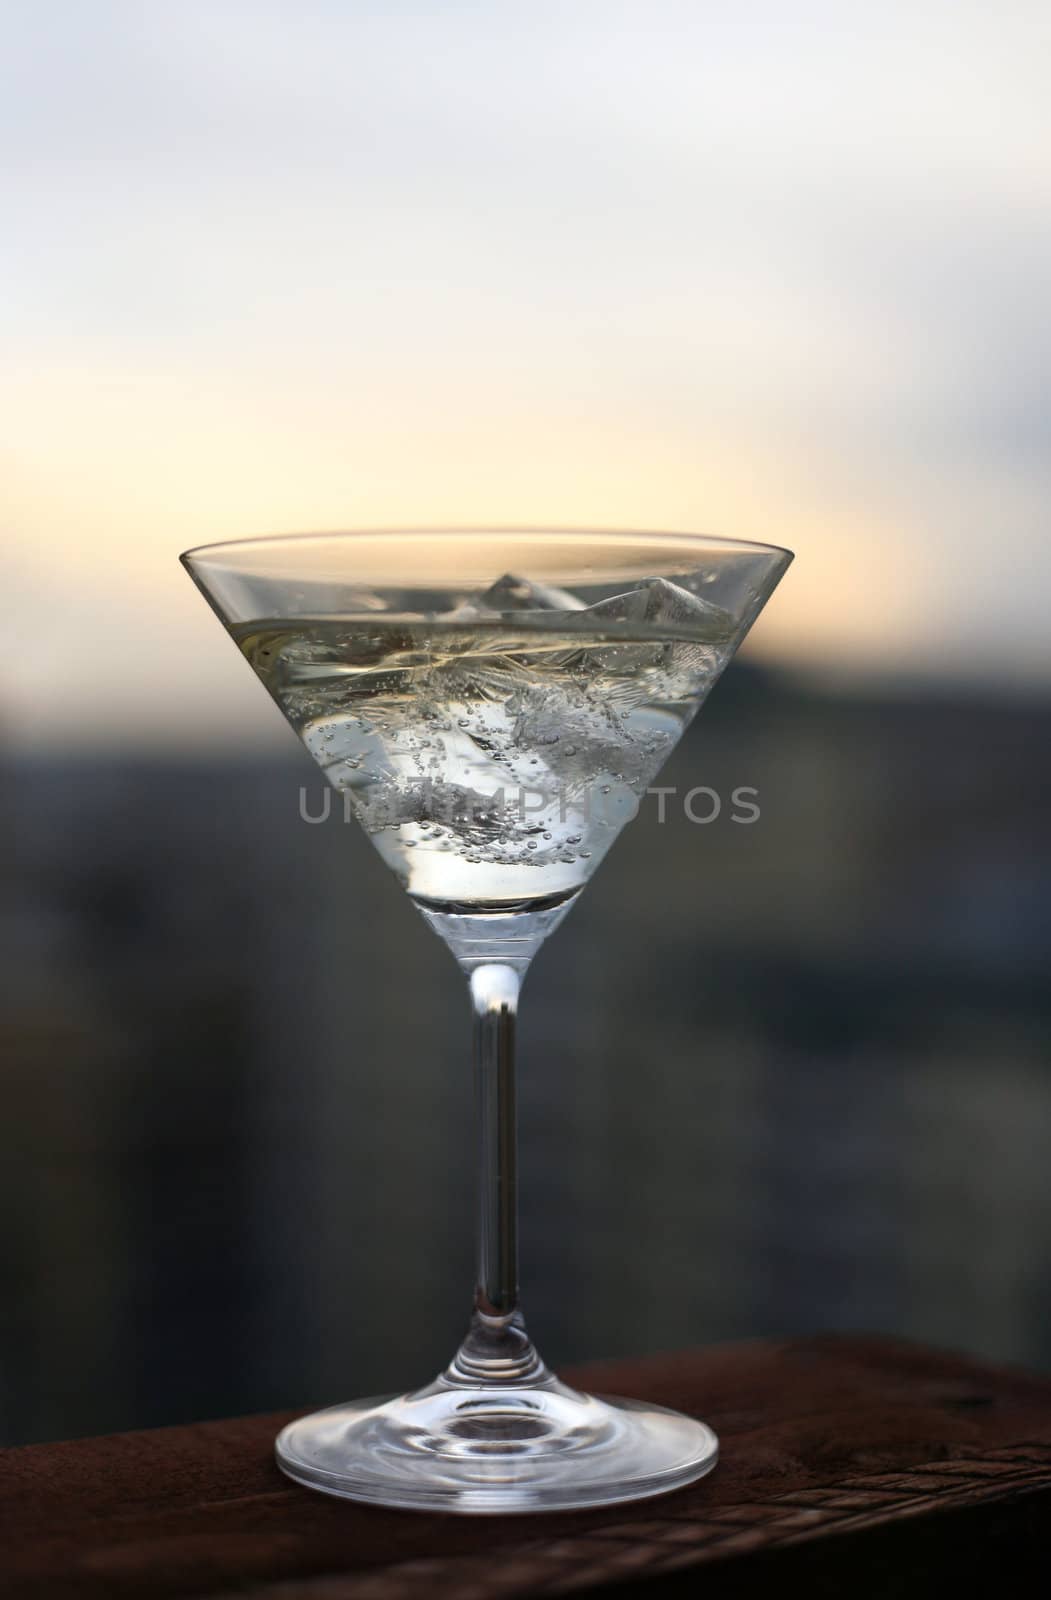 Martini on a sunset by friday